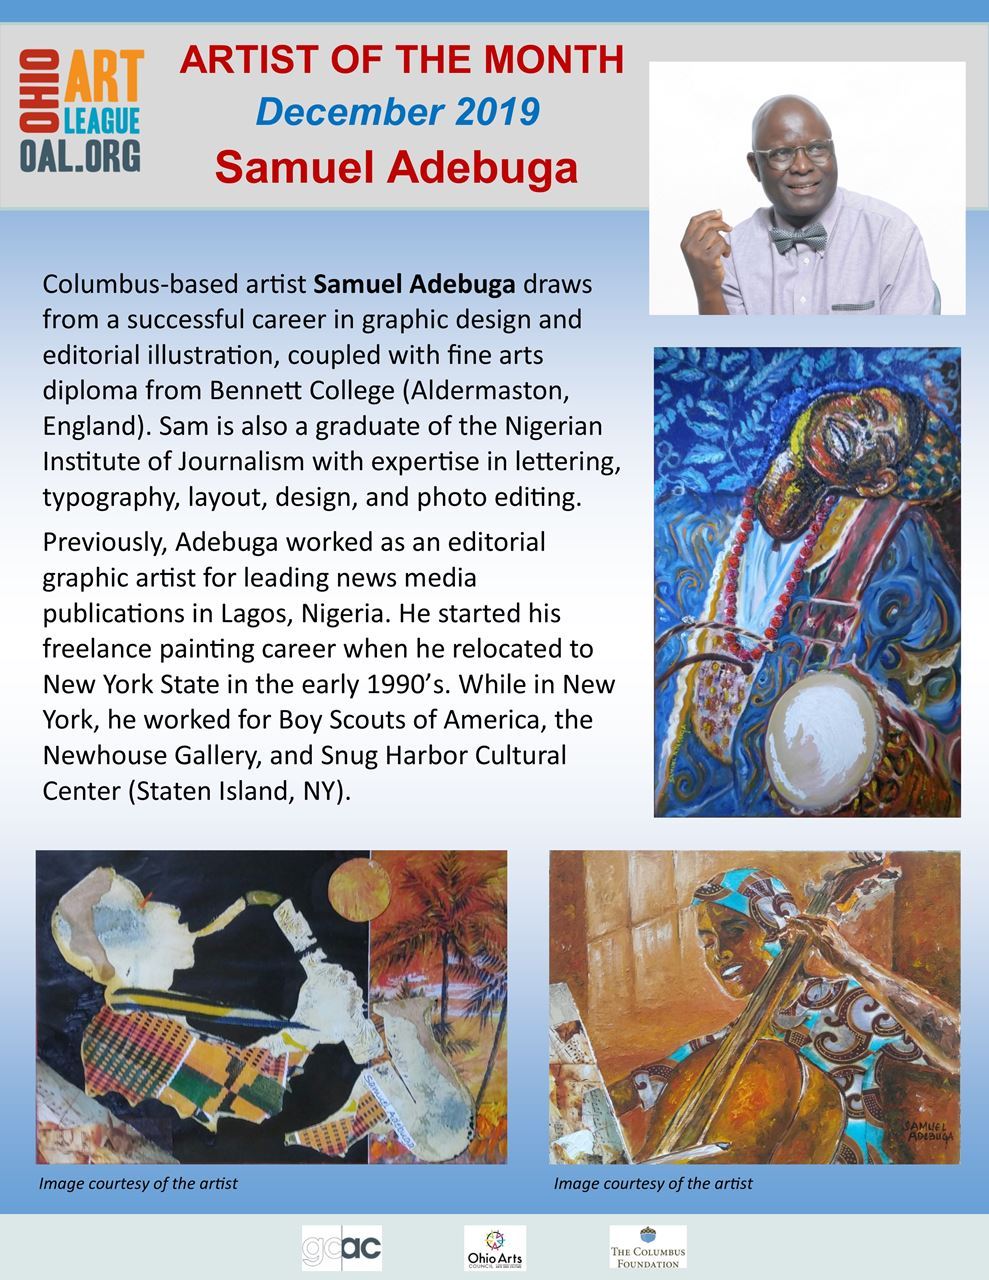 Artist of the month December 2019 Samuel Adebuga Columbus-based artist Sameul Adebuga draws from a successful career in graphic design and editorial illustration, coupled with fine arts diploma from Bennett College (Aldermaston, England). Sam is also a graduate of the Nigerian Institute of Journalism with expertis in lettering, typography, layout, design, and photo editing. Prevously, Adebuga worked as an editorial graphic artist for leading news media publications in Lagos, Nigeria. He started his freelance painting career when he relocated to New York state in the early 1990's. While in New York, he worked for Boy Scouts of America, the newhouse Gallery and Snug Harbor Cultural Center (Staten Island, NY).